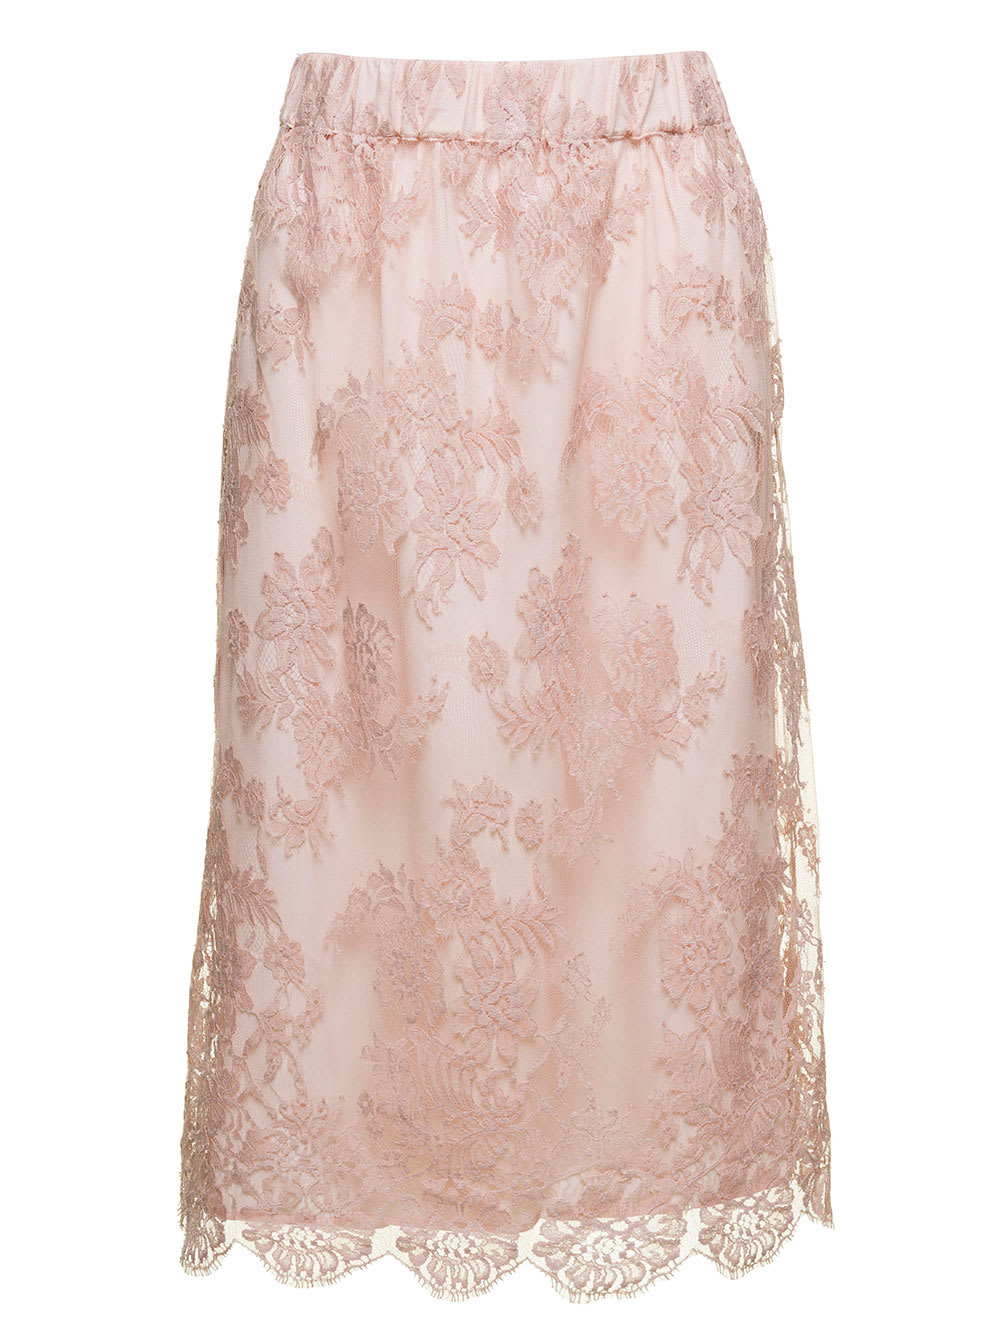 GUCCI MIDI LIGHT PINK SKIRT WITH REMOVABLE LINING AND SCALLOPED HEM IN FLORAL COTTON LACE WOMAN